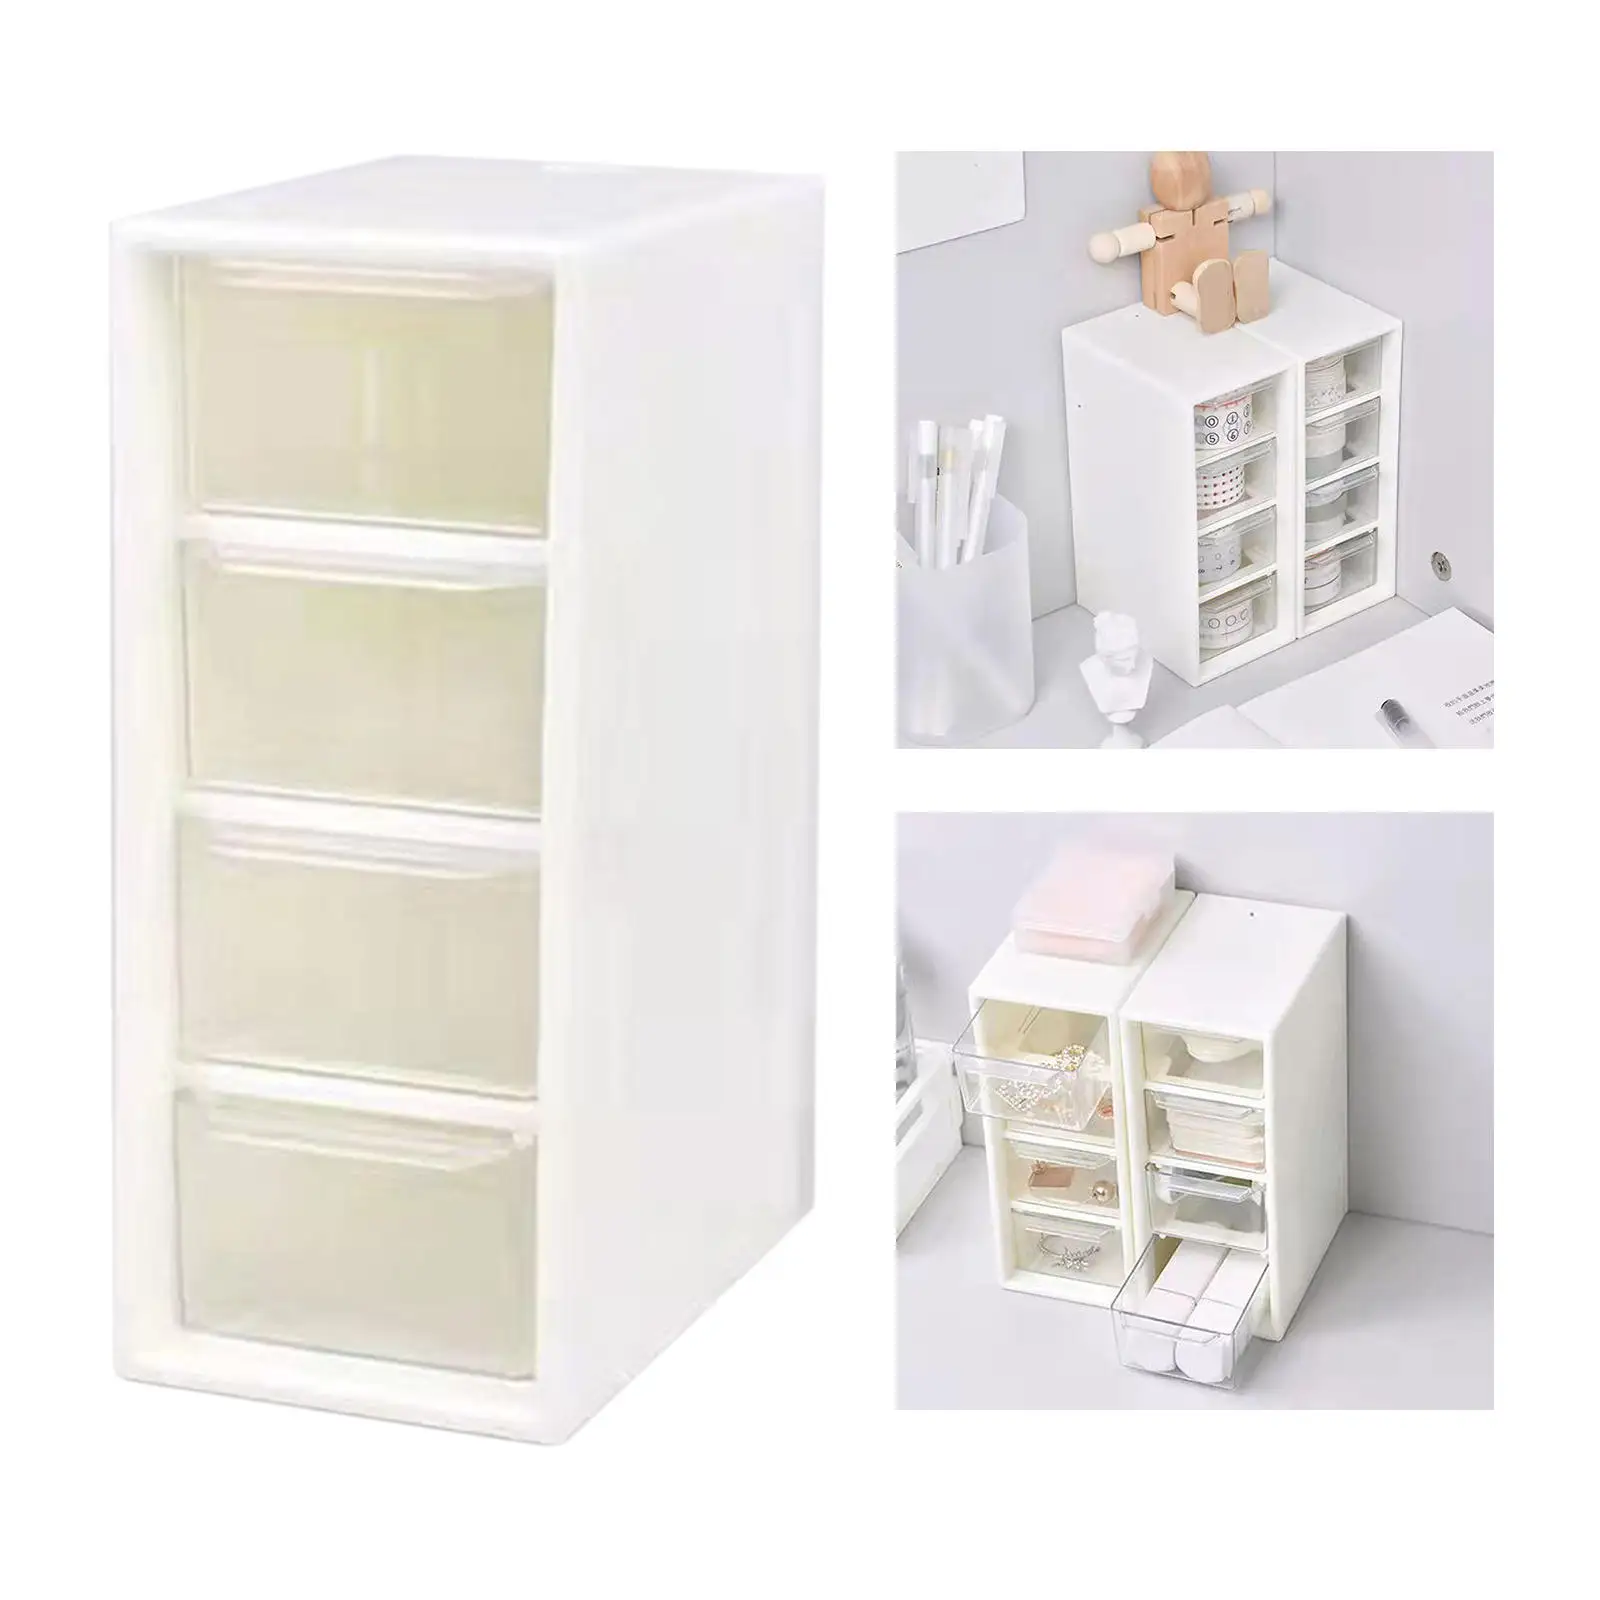 White Desktop Cosmetic Storage Box with 4 Drawer Units Container Case Small Organizer Box for Office Home Makeup 15.7x6.5x9.7cm